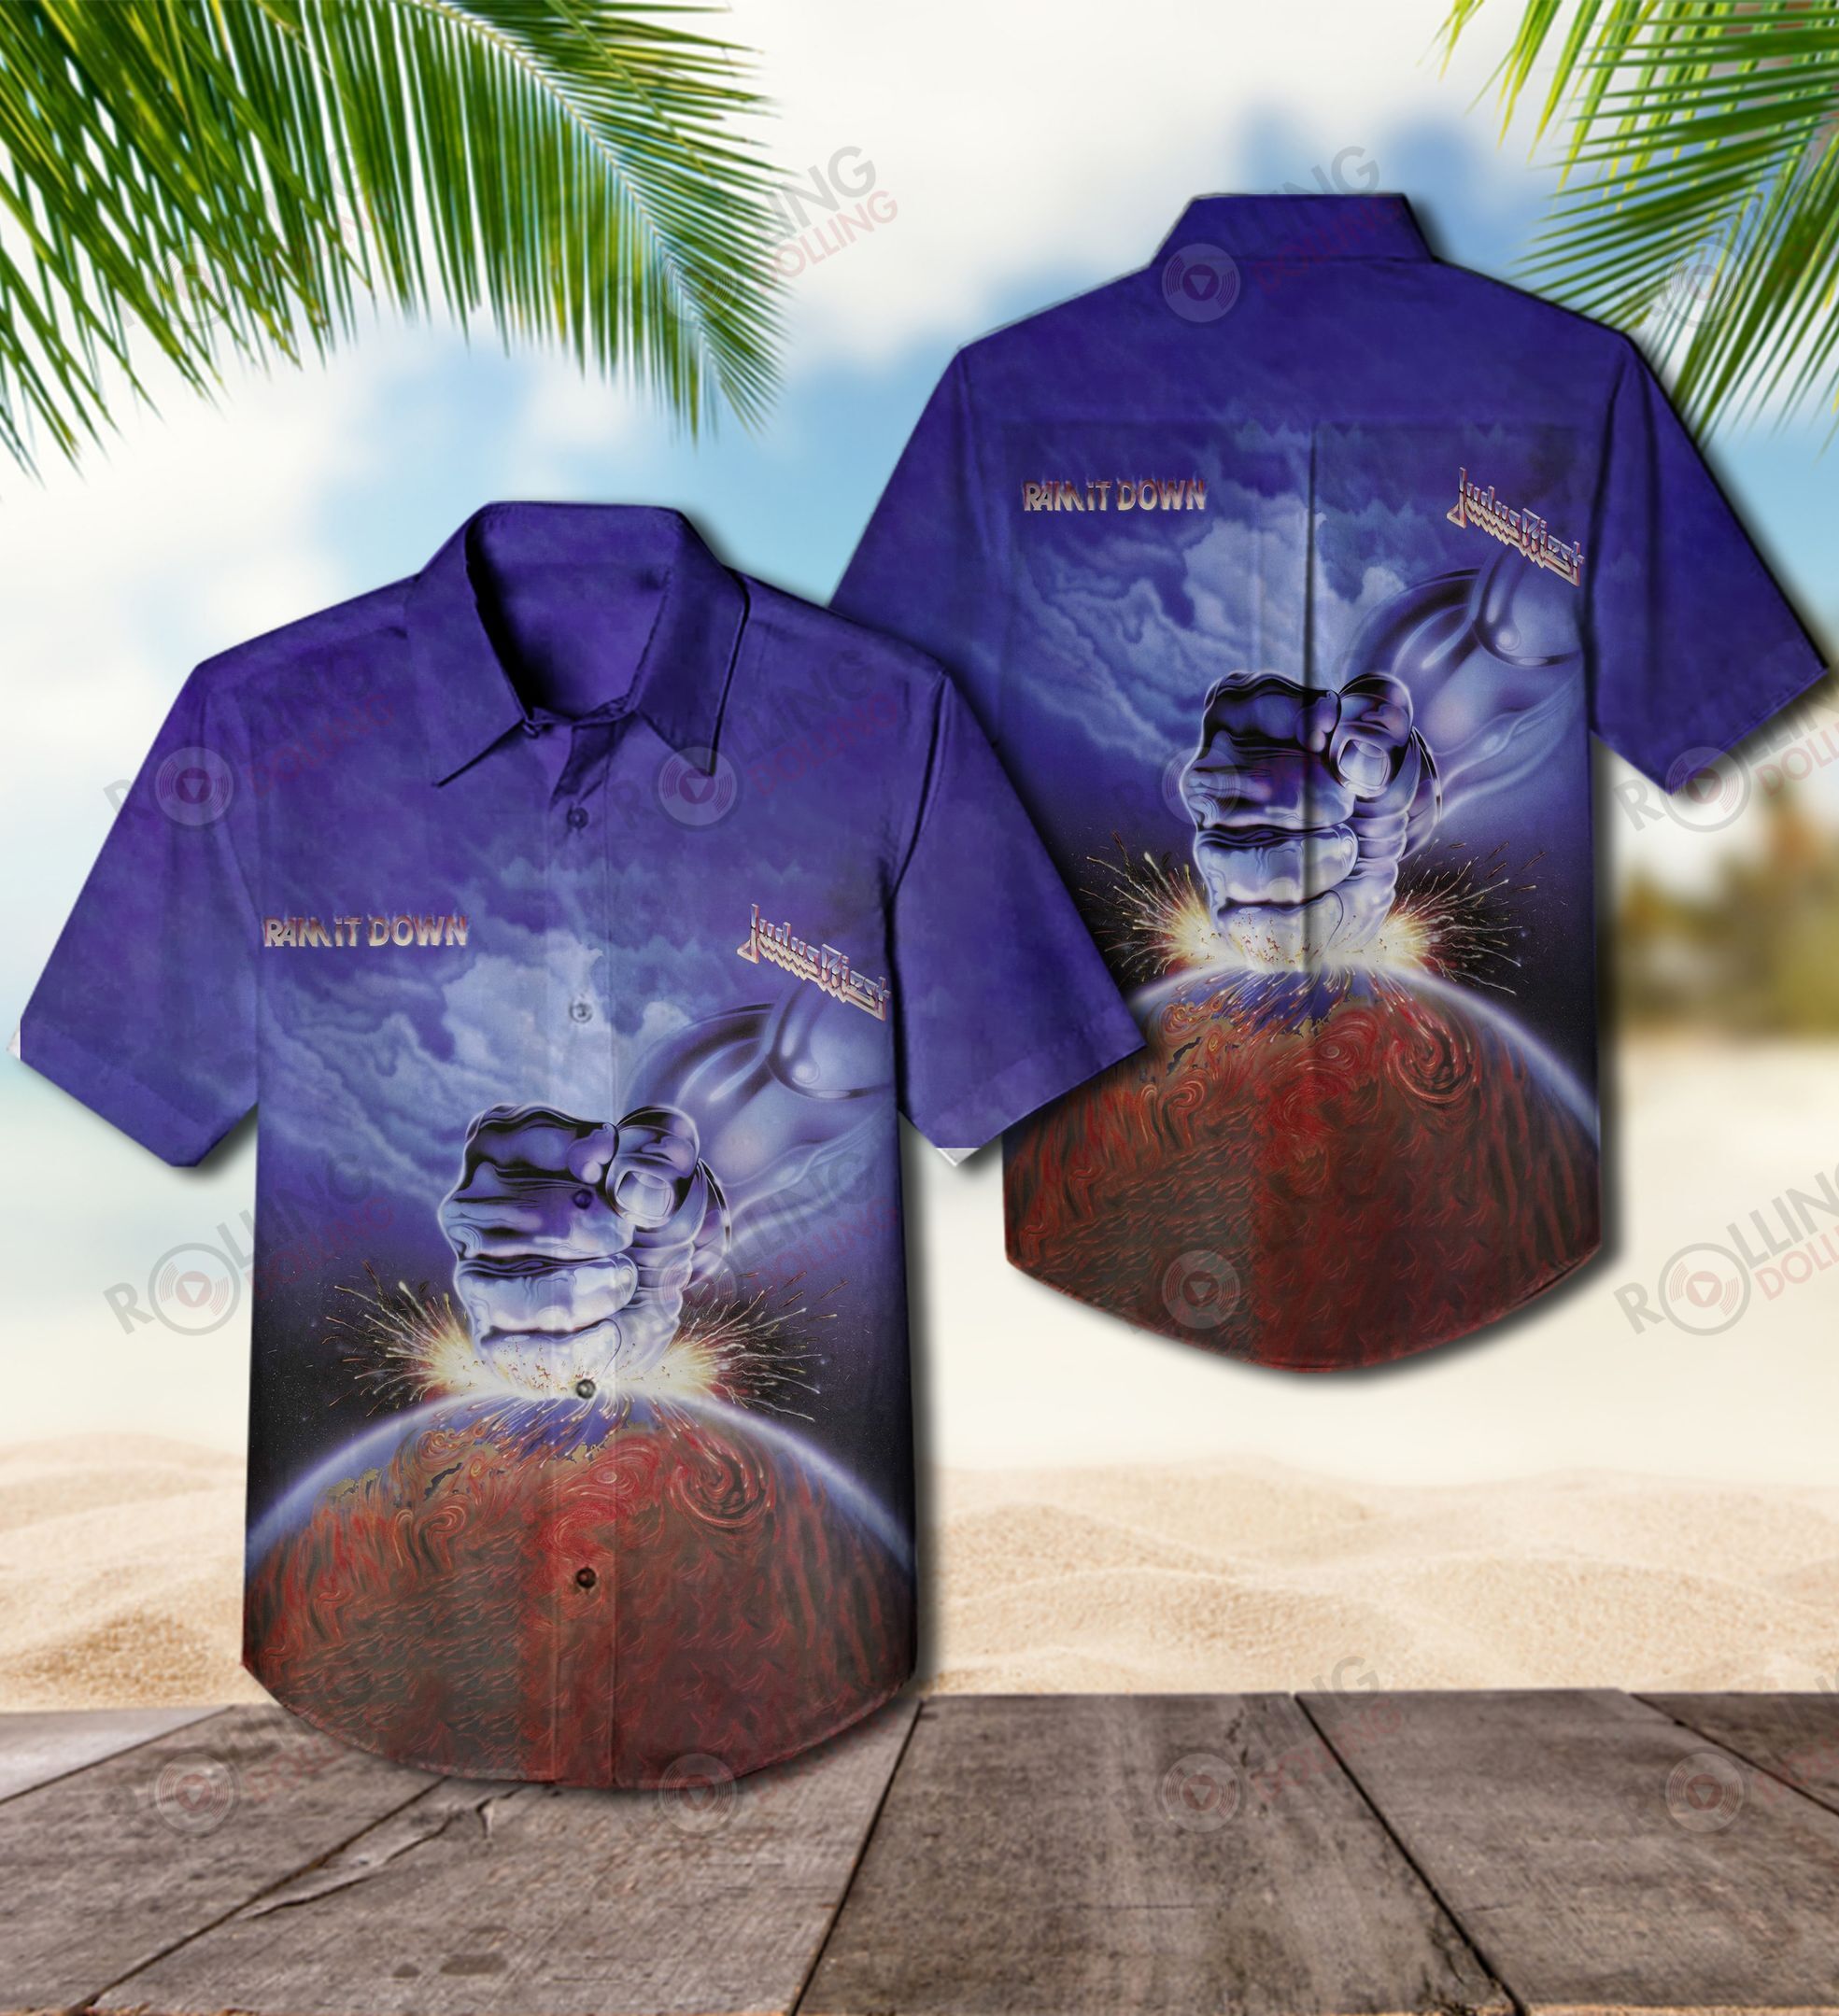 We have compiled a list of some of the best Hawaiian shirt that are available 211